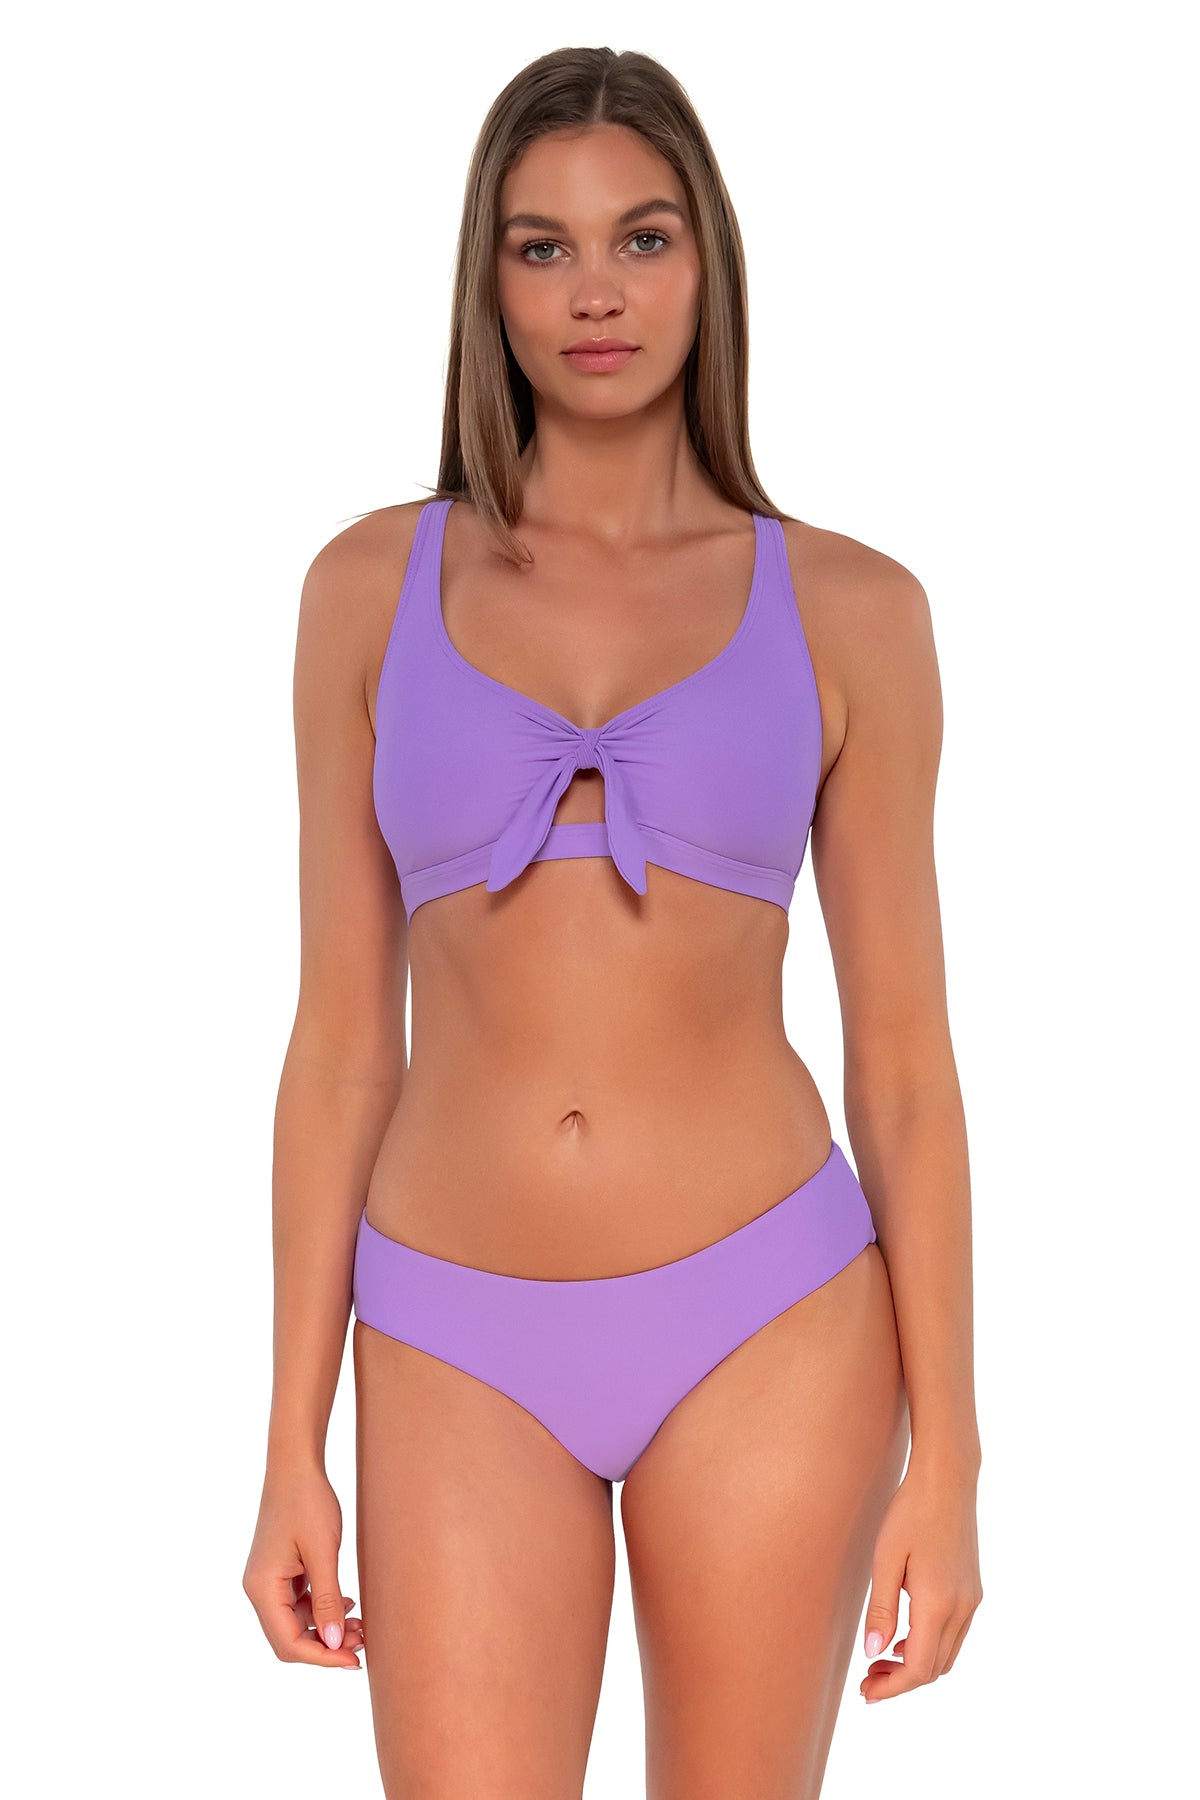 Front pose #1 of Daria wearing Sunsets Passion Flower Brandi Bralette Top showing keyhole front tie with matching Alana Reversible Hipster bikini bottom